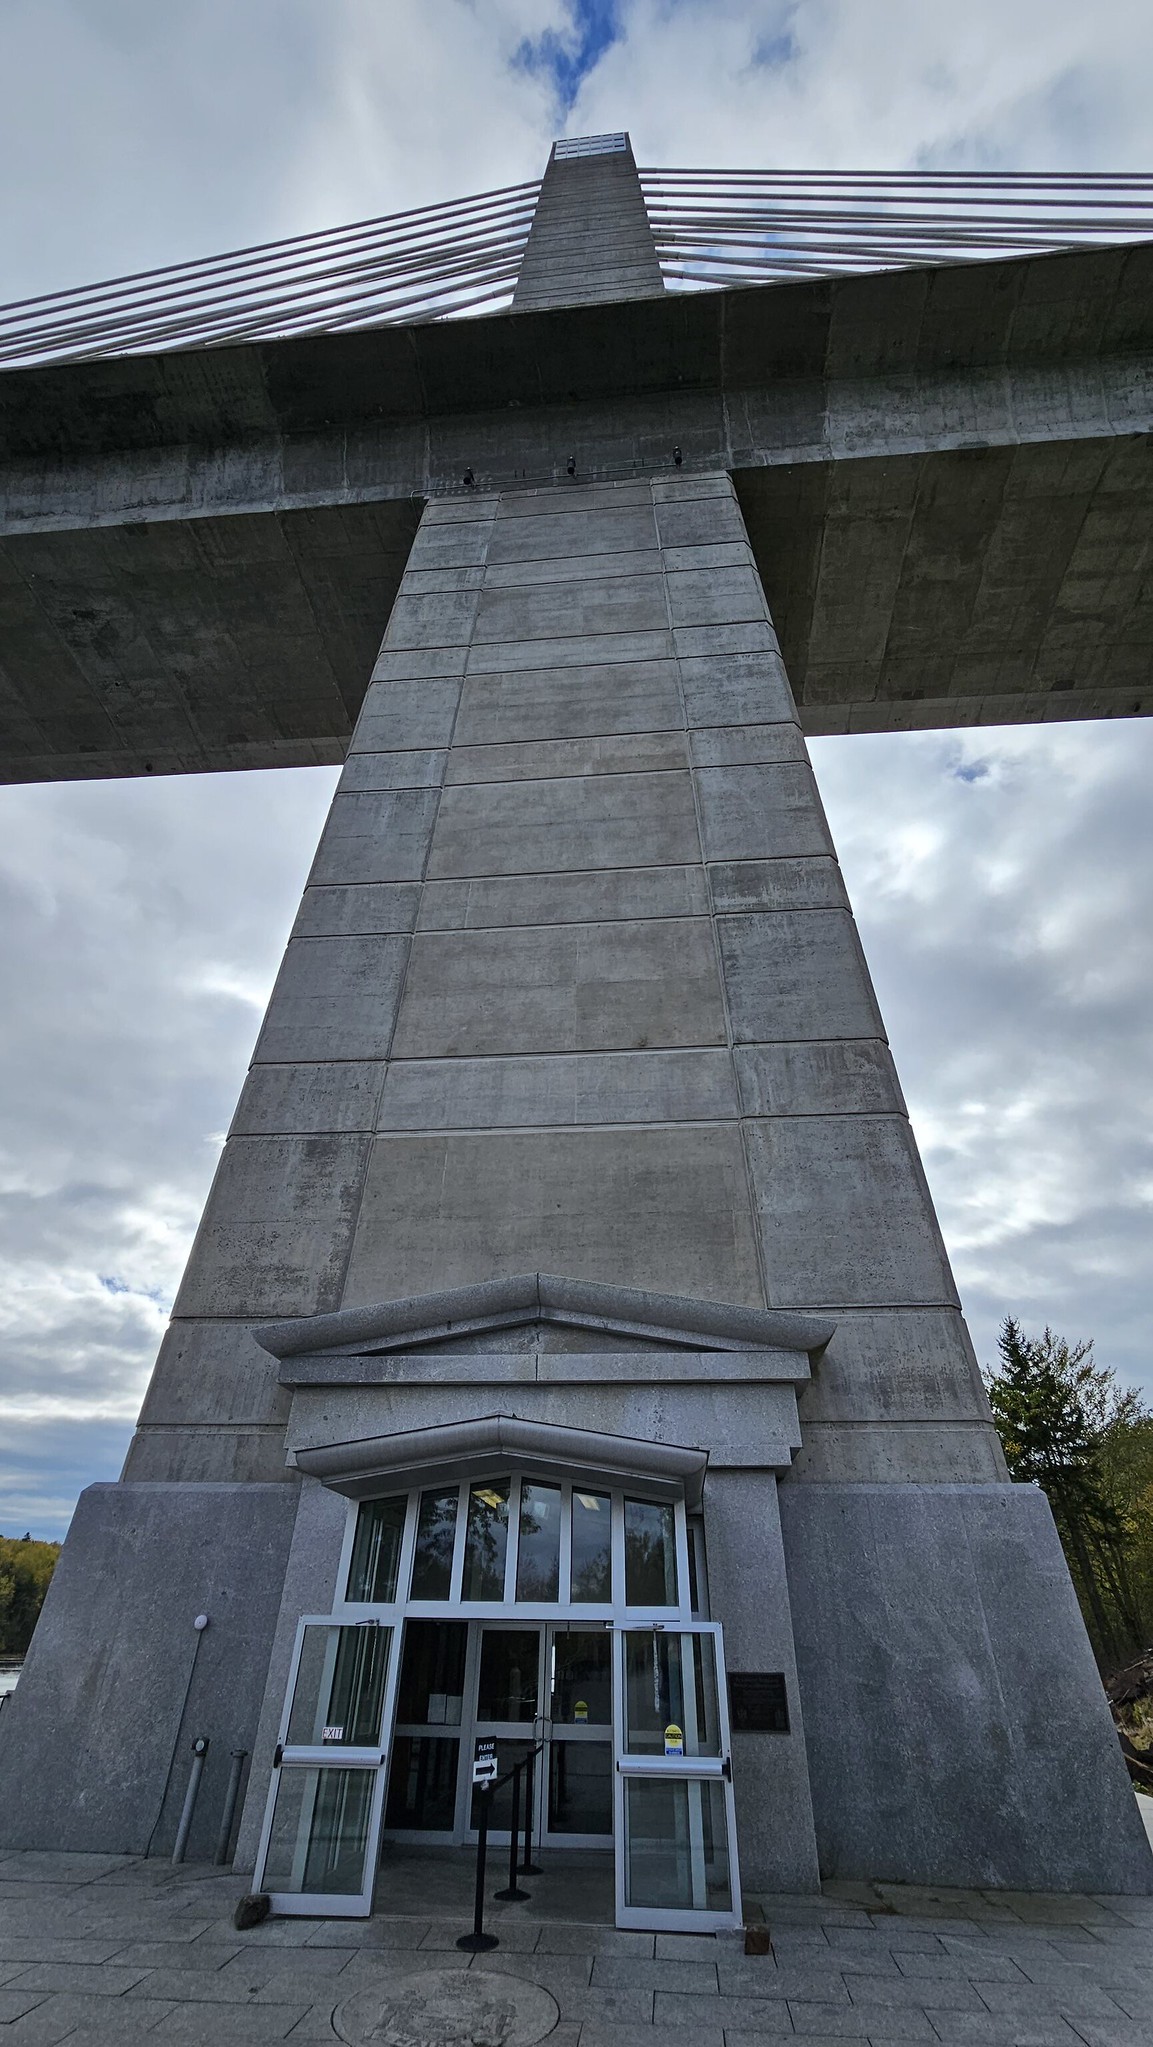 Looking up the 420ft+ west tower of the Pensobscot Narrows Bridge